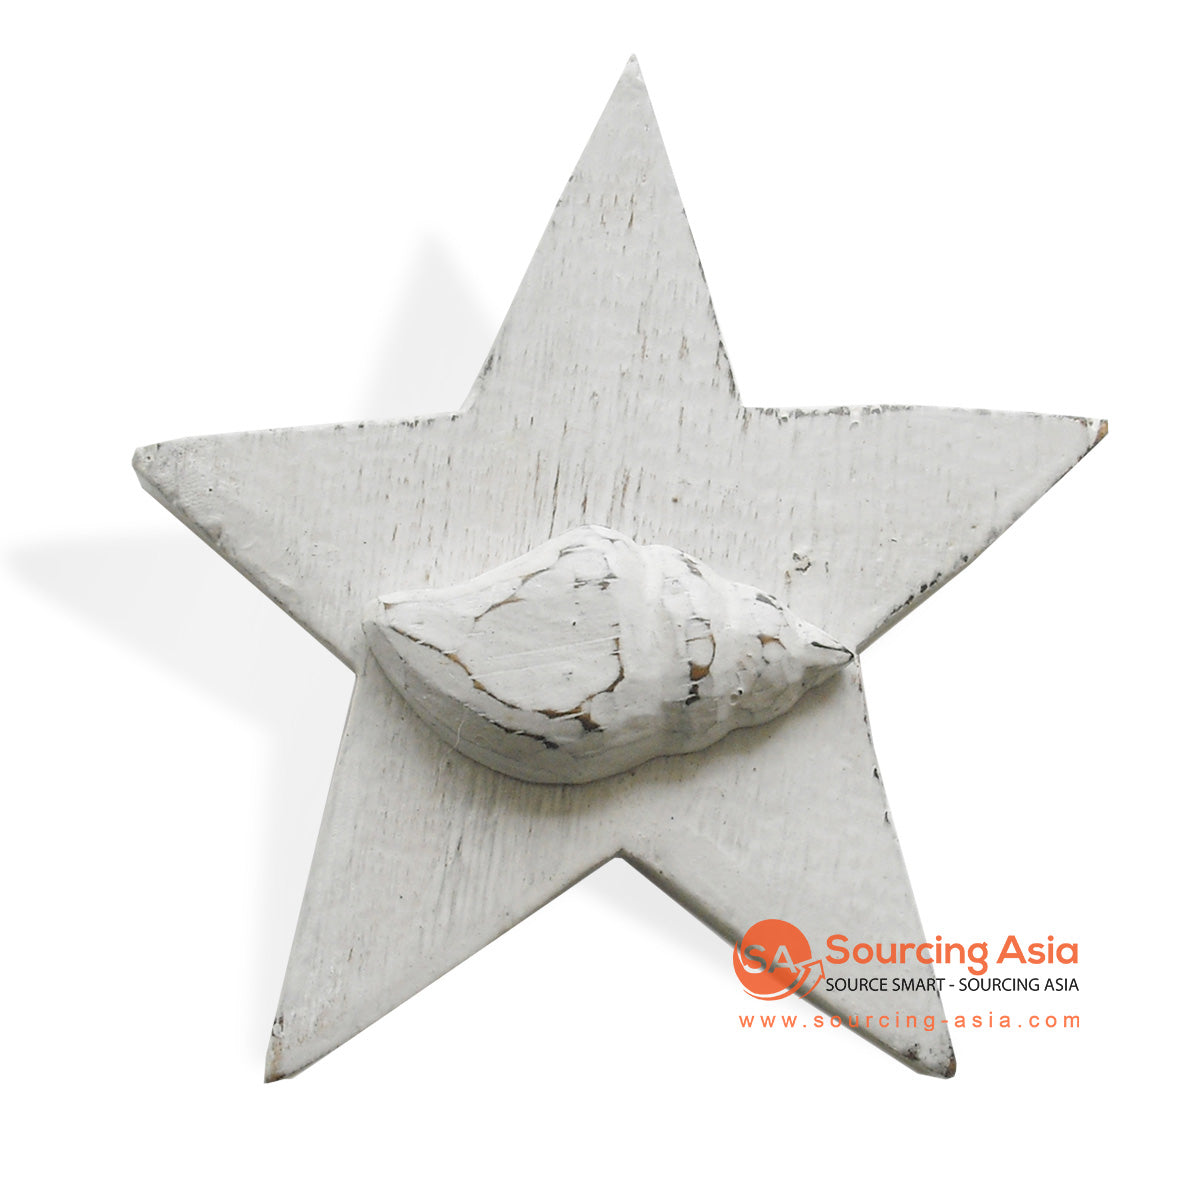 MDC78 WOODEN STAR WALL HANGING DECORATION WITH SHELL ORNAMENT